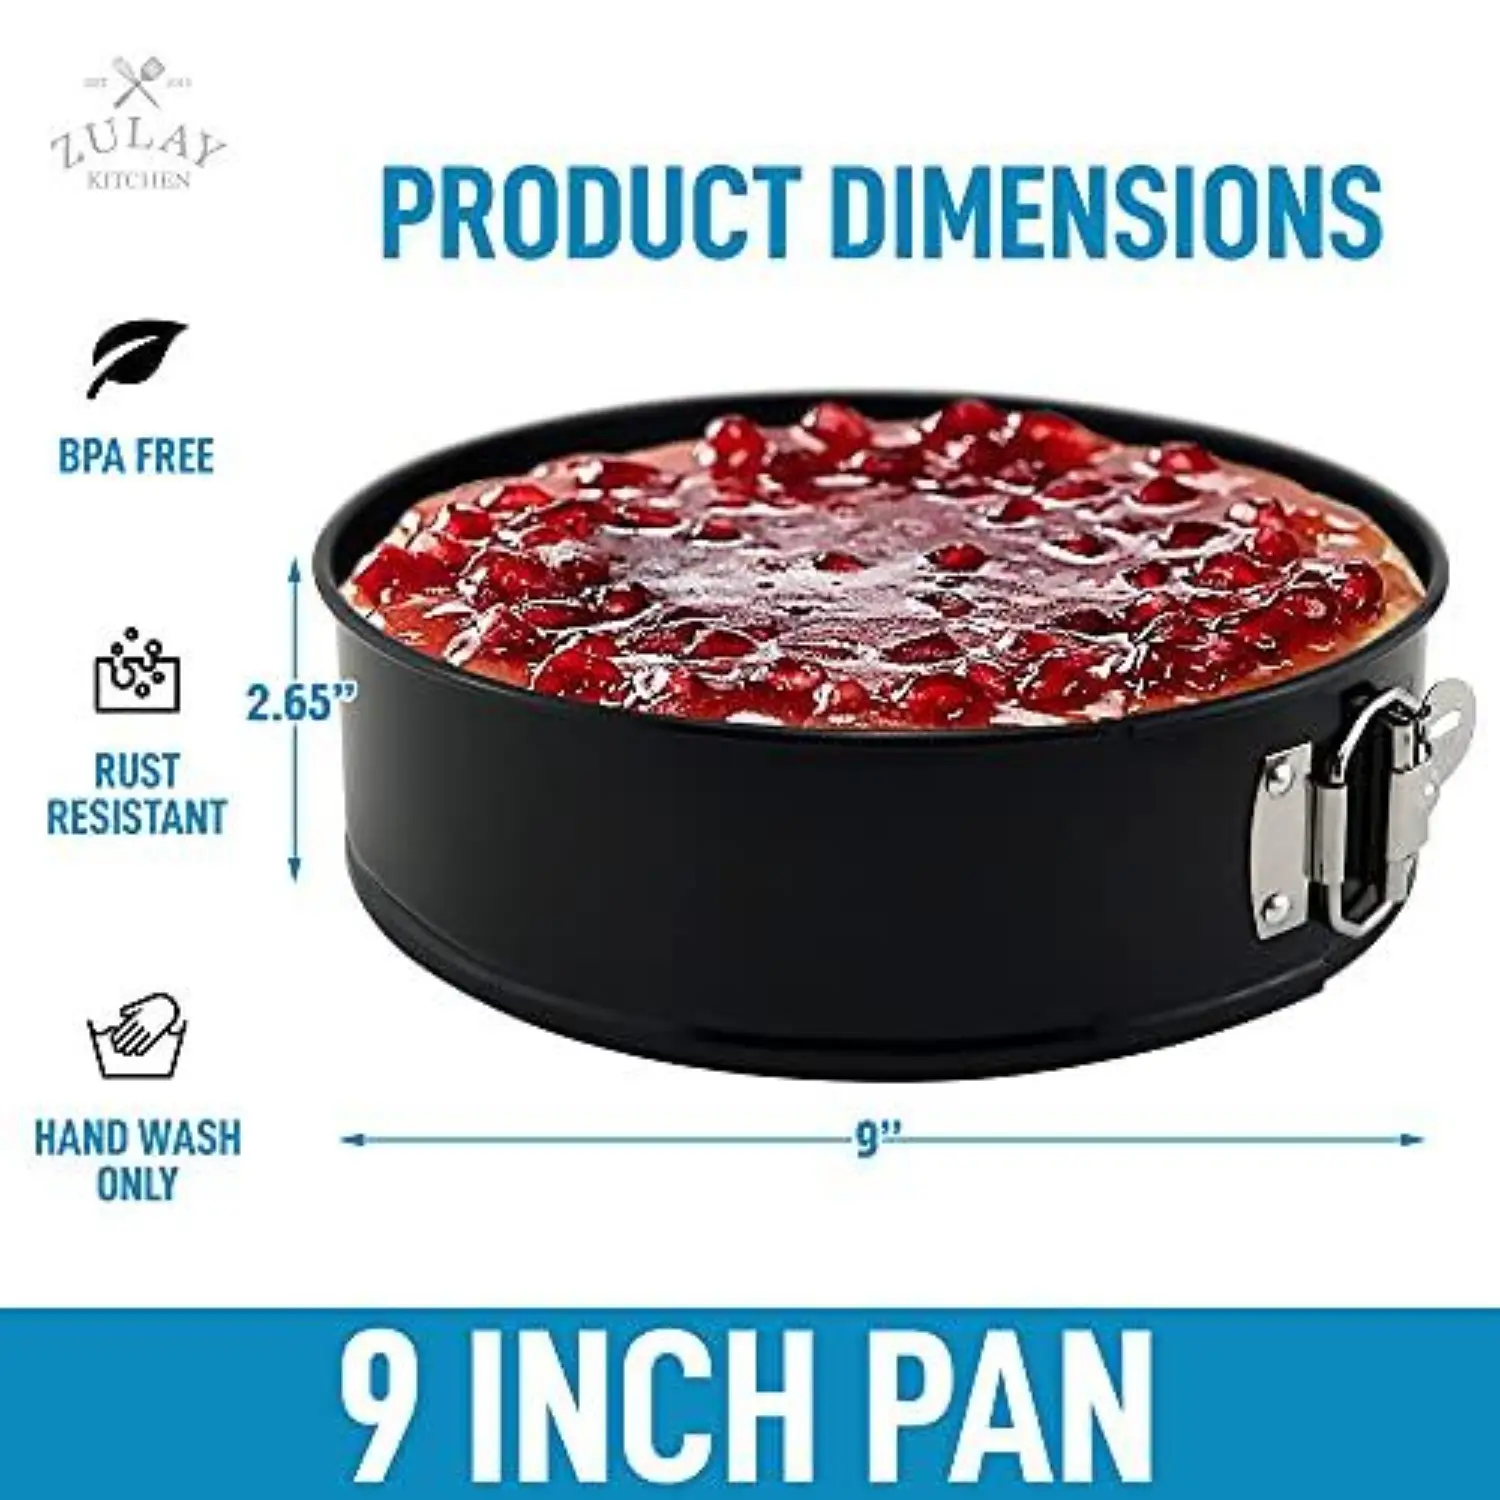 ZK Cheesecake Pan - Springform Pan with Safe Non-Stick Coating - 9 Inch 